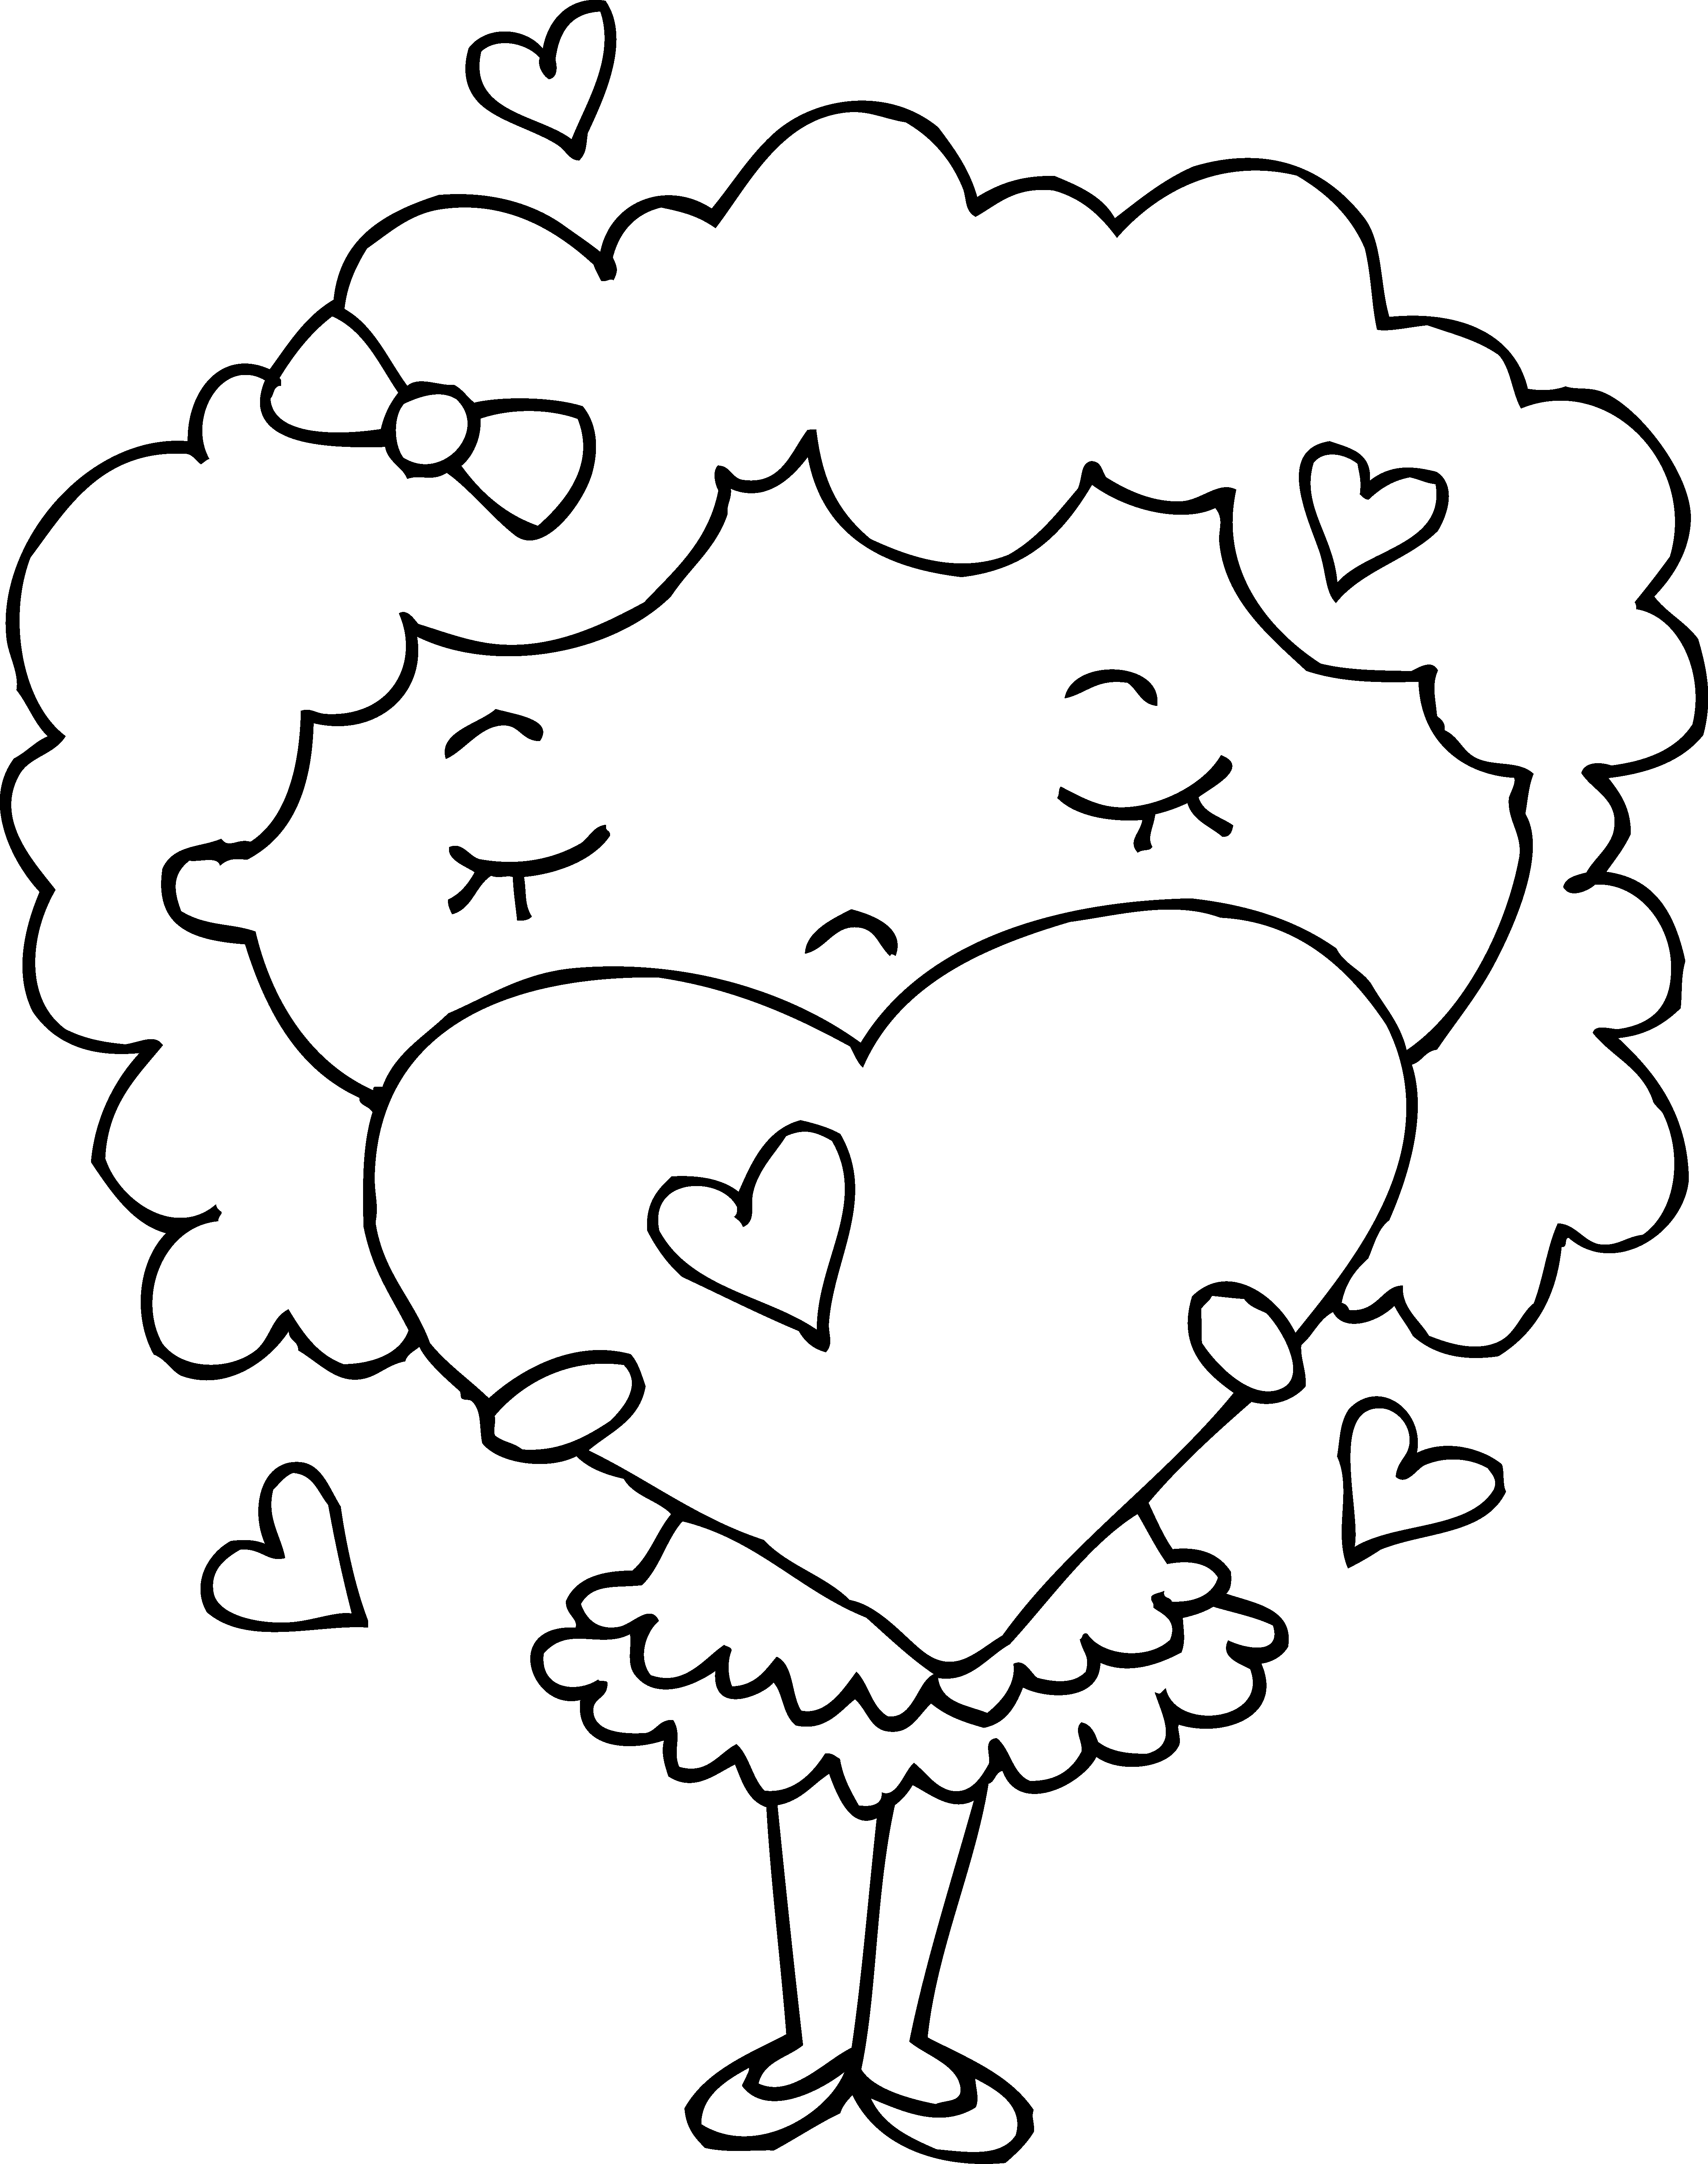 Coloring Page Of Girl With Hearts - Coloring Page Of Girl With Hearts (4709x5966)